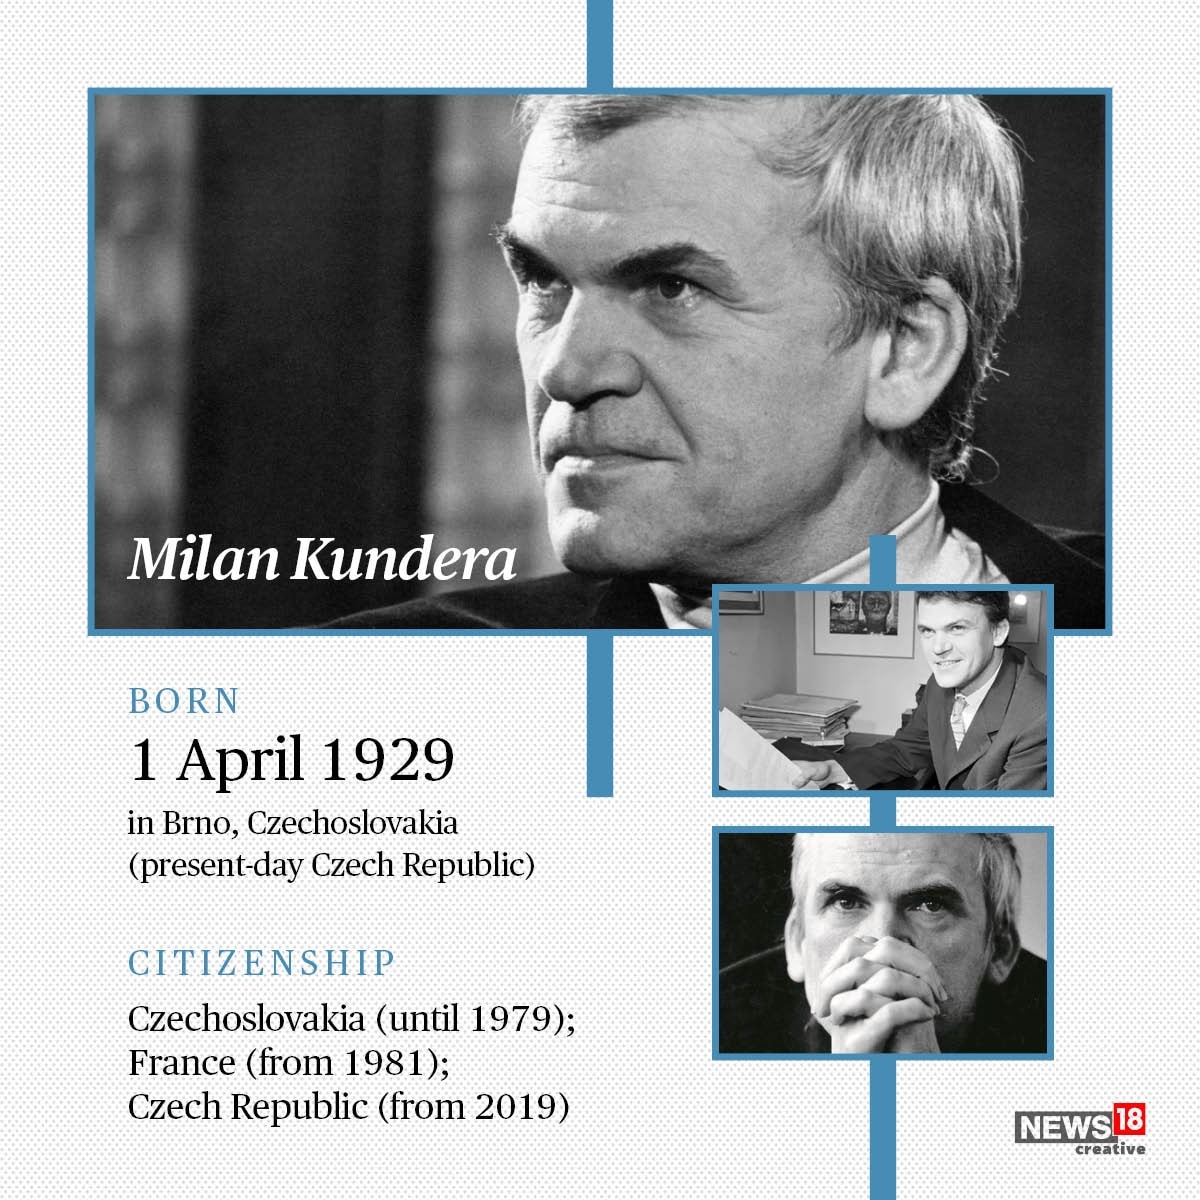 Milan Kundera: Life and Times of the Legendary Author In Pictures - News18